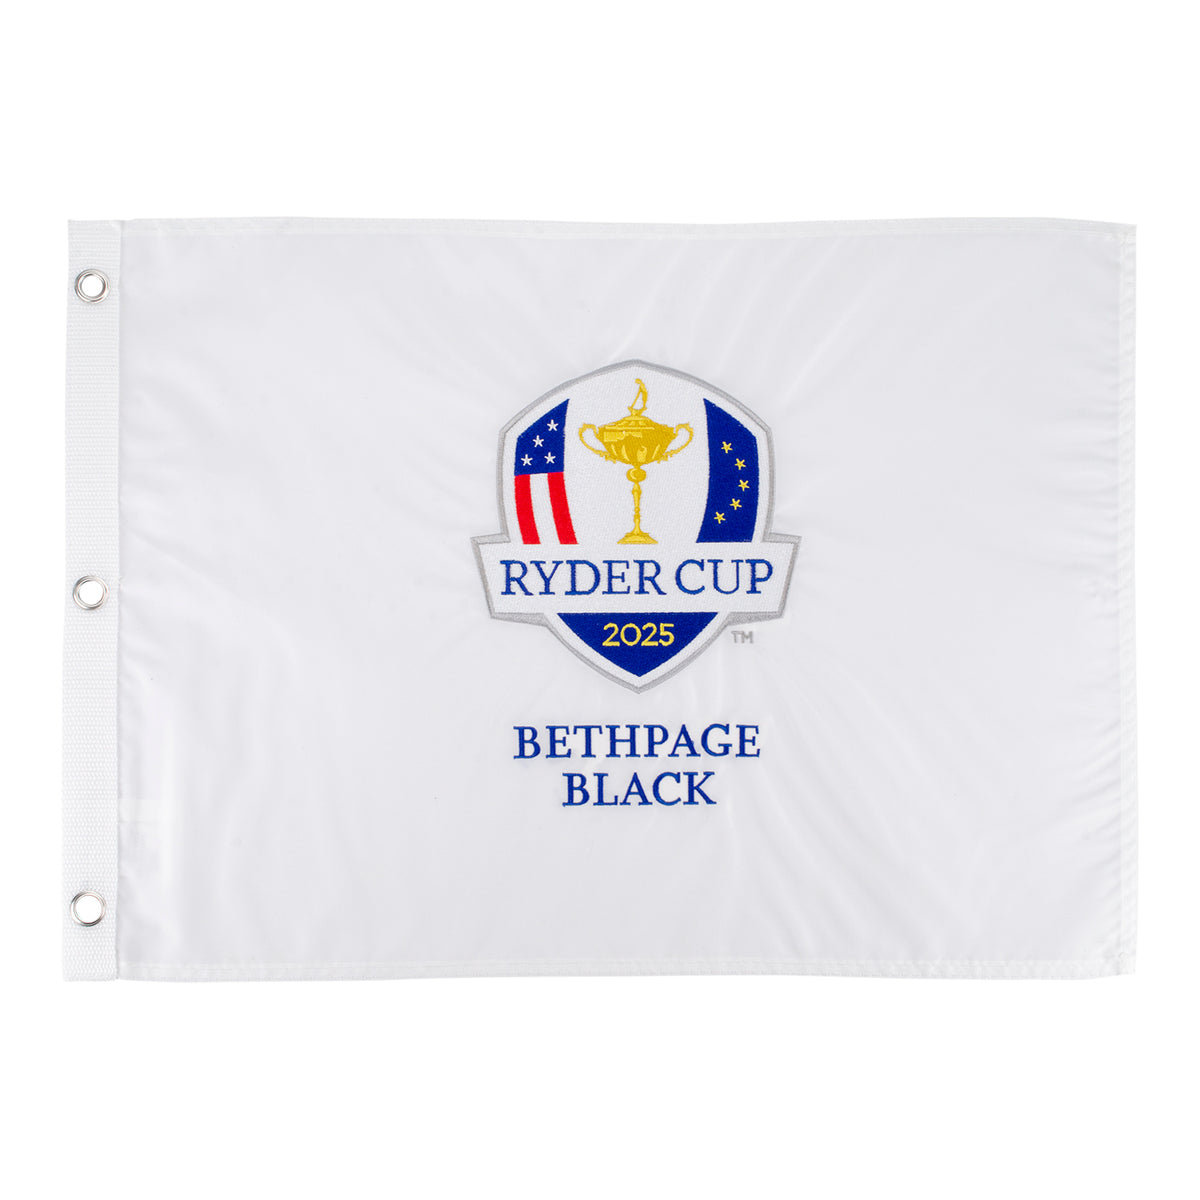 Ahead 2025 Ryder Cup Embroidery Pin Flag